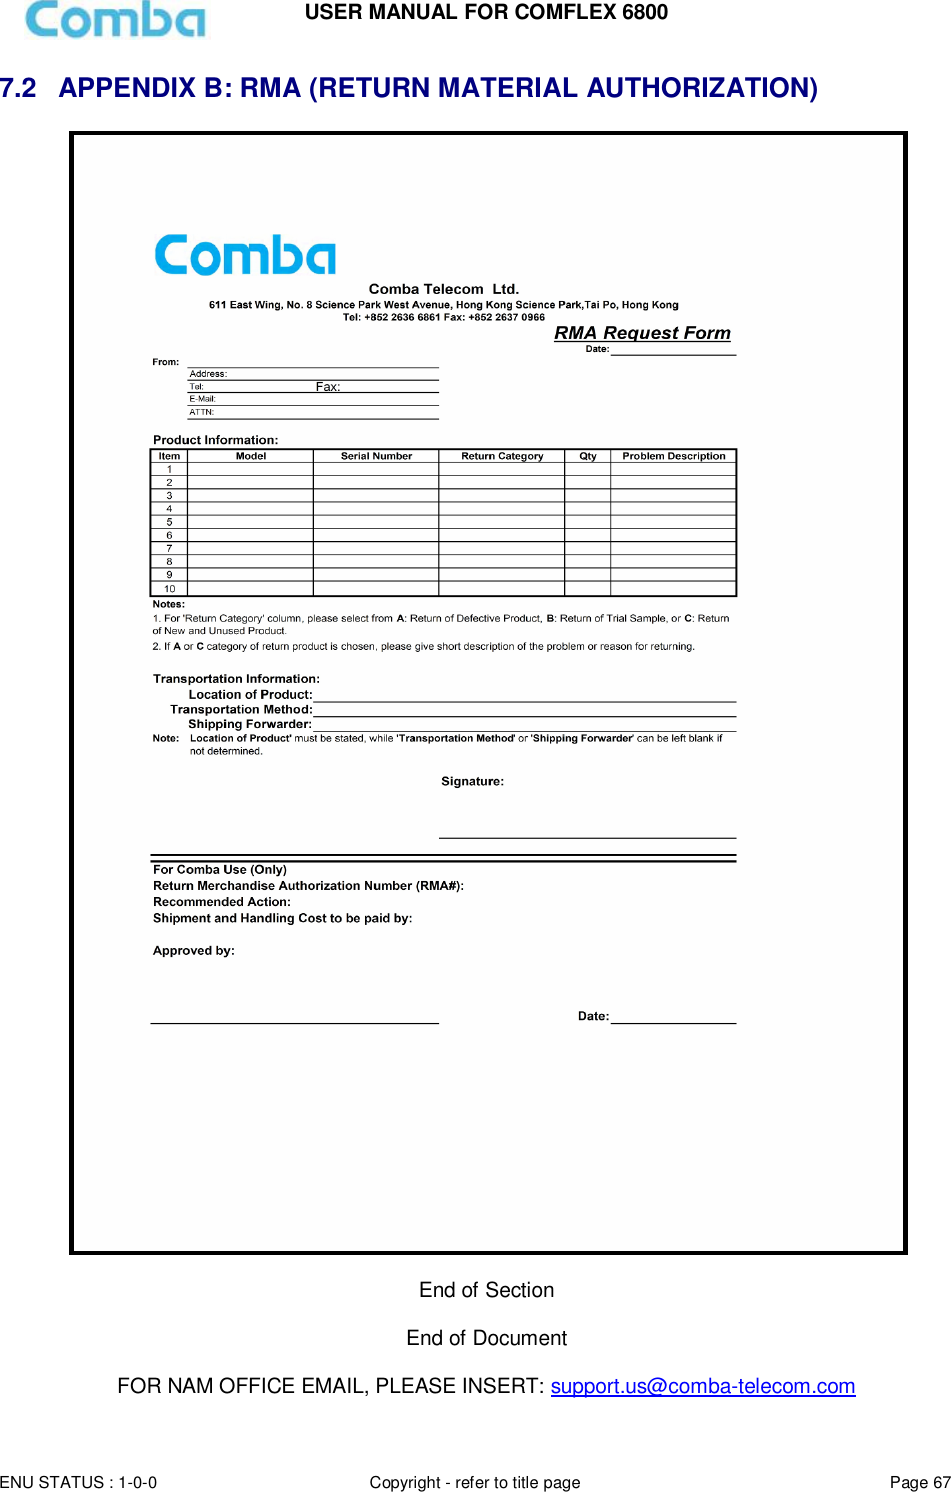 USER MANUAL FOR COMFLEX 6800  ENU STATUS : 1-0-0 Copyright - refer to title page Page 67     7.2  APPENDIX B: RMA (RETURN MATERIAL AUTHORIZATION)   End of Section  End of Document  FOR NAM OFFICE EMAIL, PLEASE INSERT: support.us@comba-telecom.com  